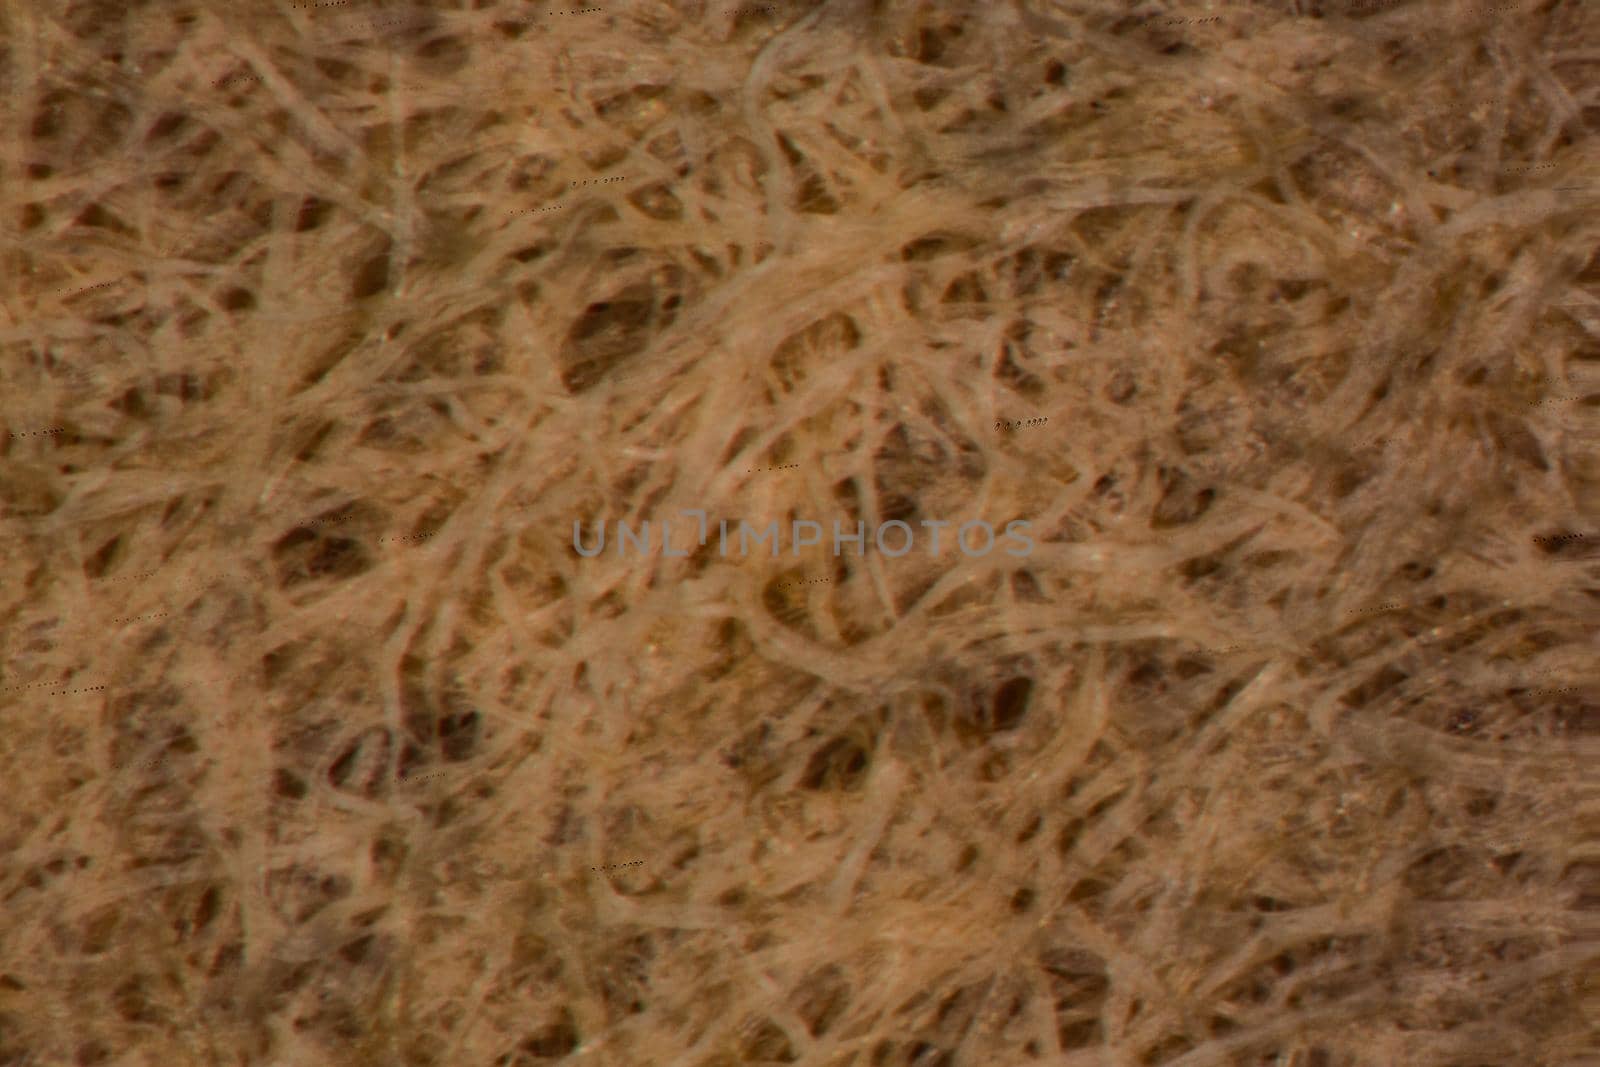 Coffee filter with fibers and paper pores under the microscope